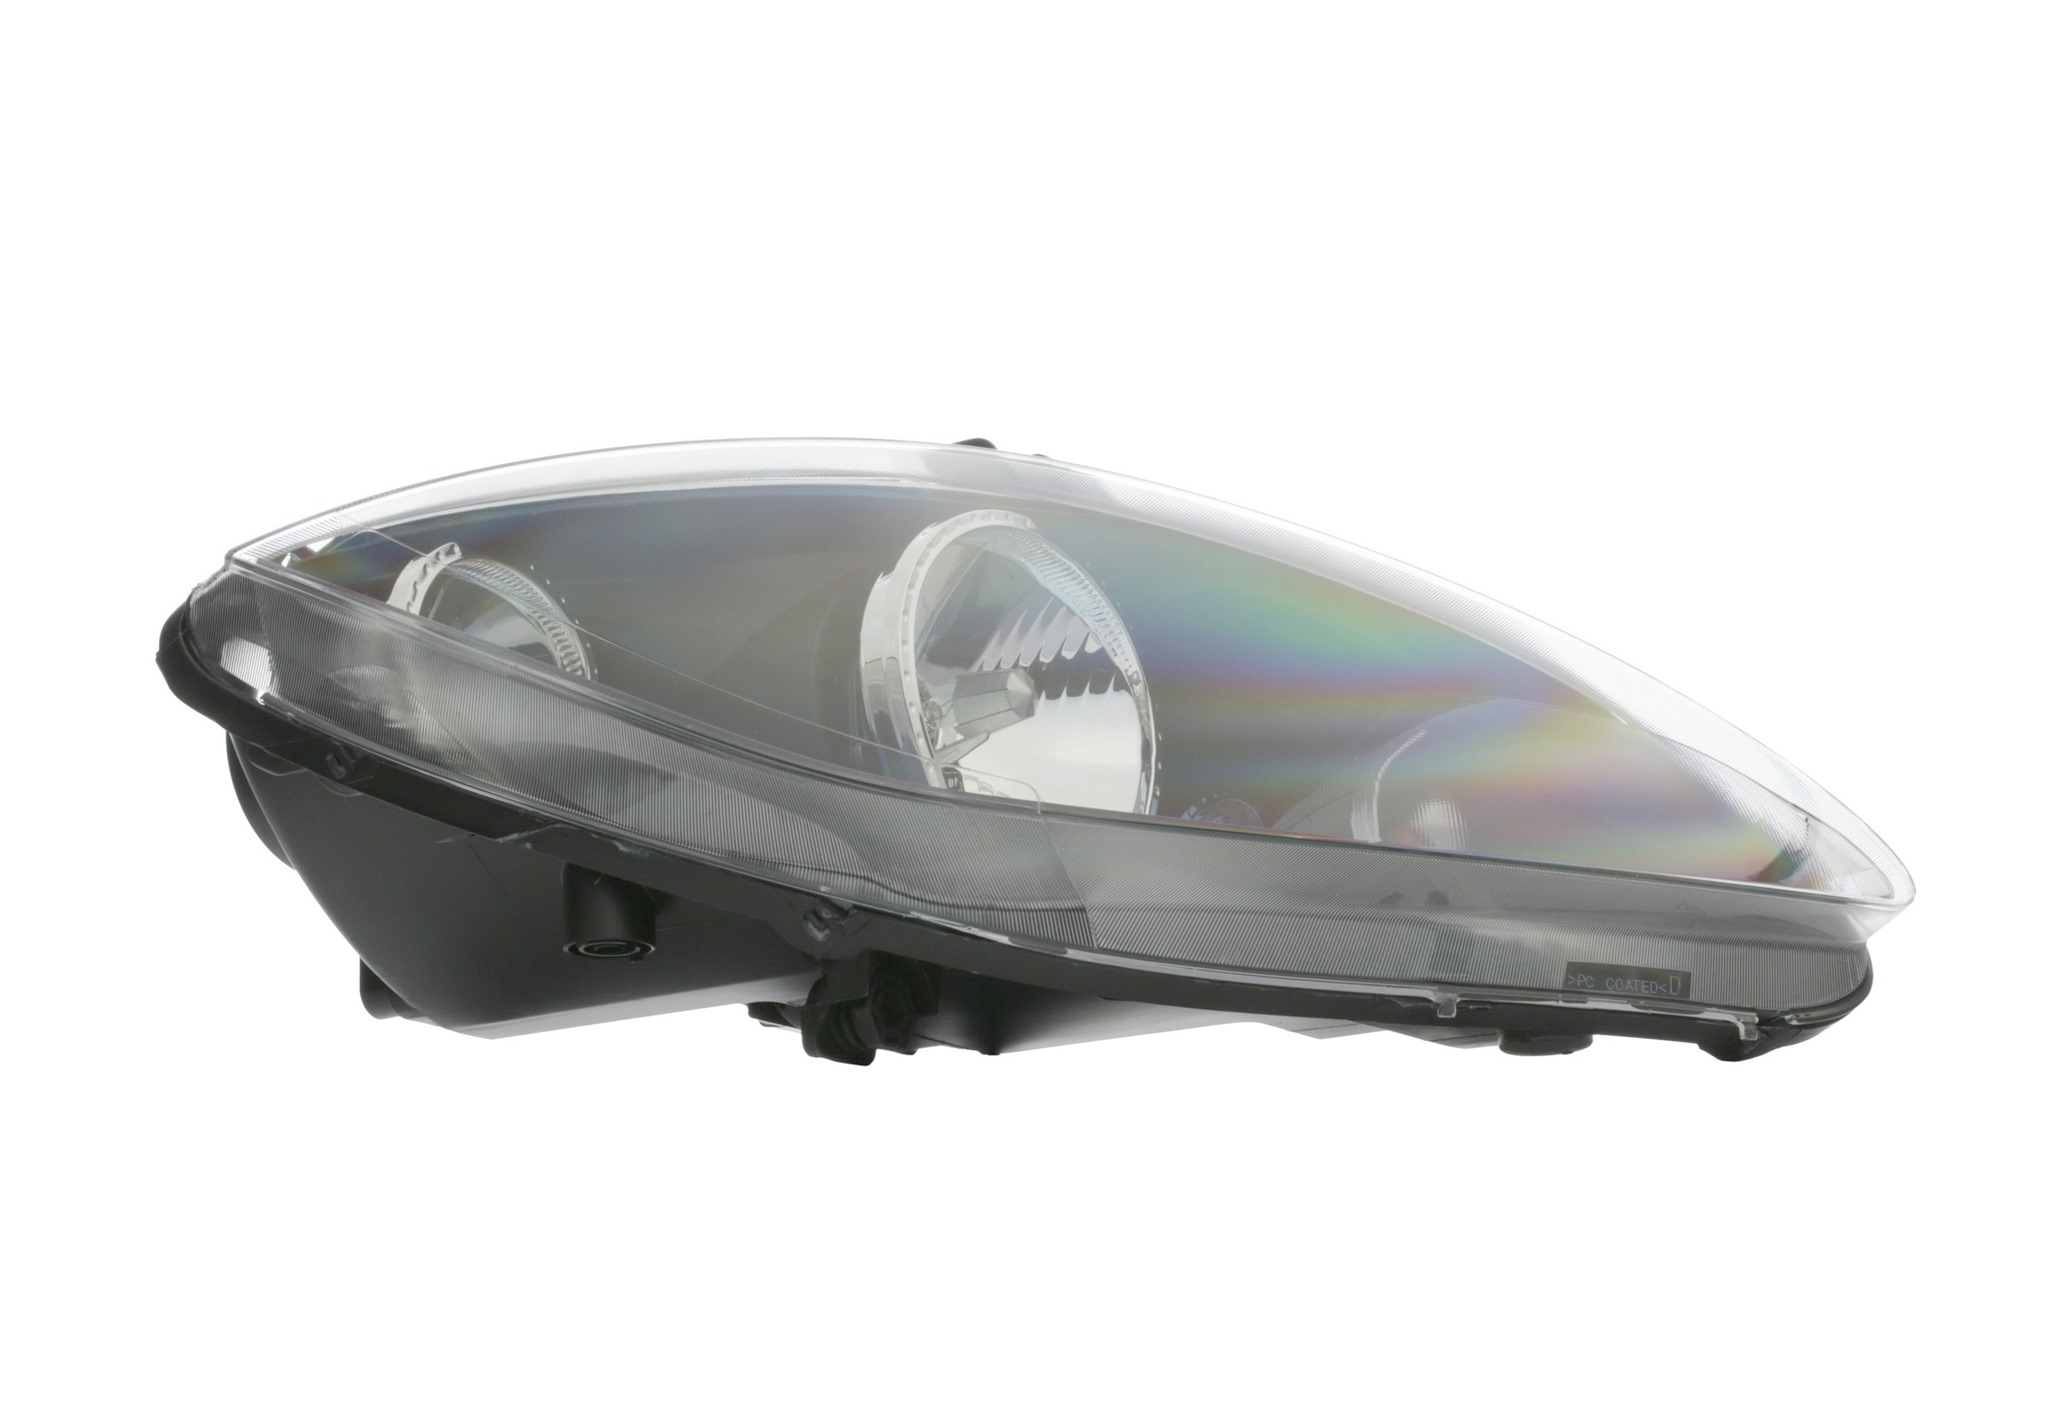 044090 VALEO Headlight IVECO Right, H7, H1, W5W, PY21W, Halogen, transparent, with low beam, for right-hand traffic, ORIGINAL PART, with bulb for low beam, with bulb for high beam, with motor for headlamp levelling